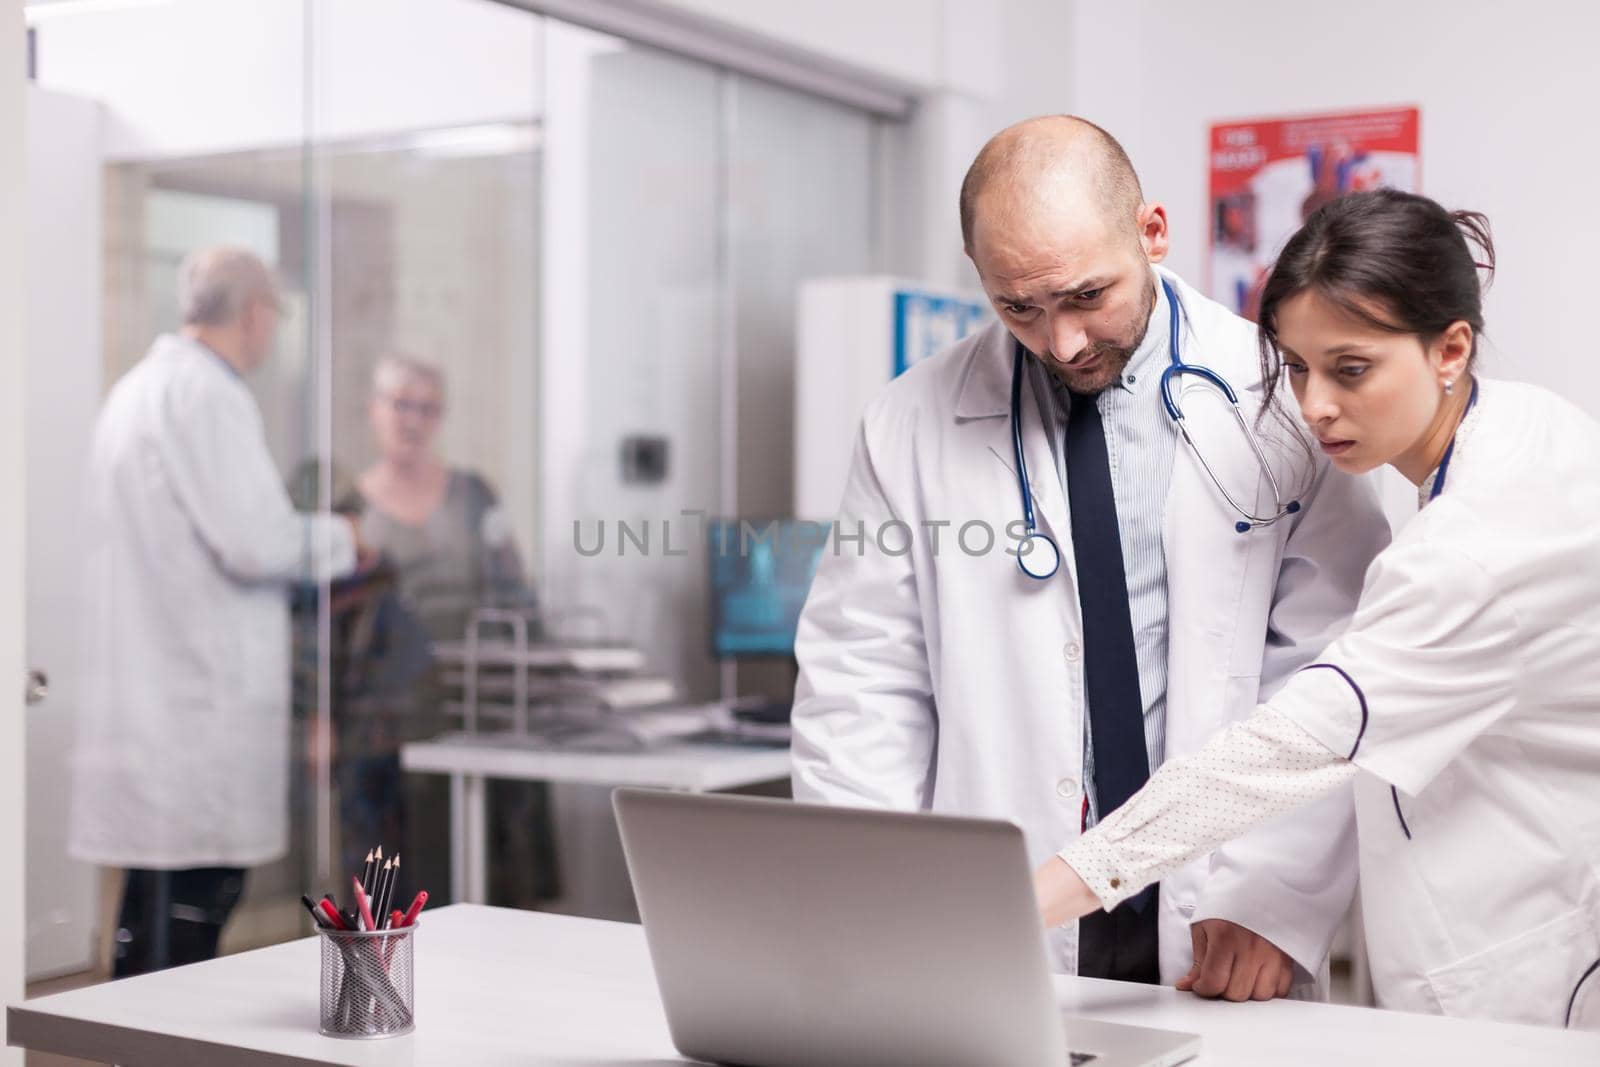 Team of young doctors working together in hospital checking patient evolution on laptop. Elderly aged woman and senior medic on clinic corridor. Physician wearing white coat and stethoscope.